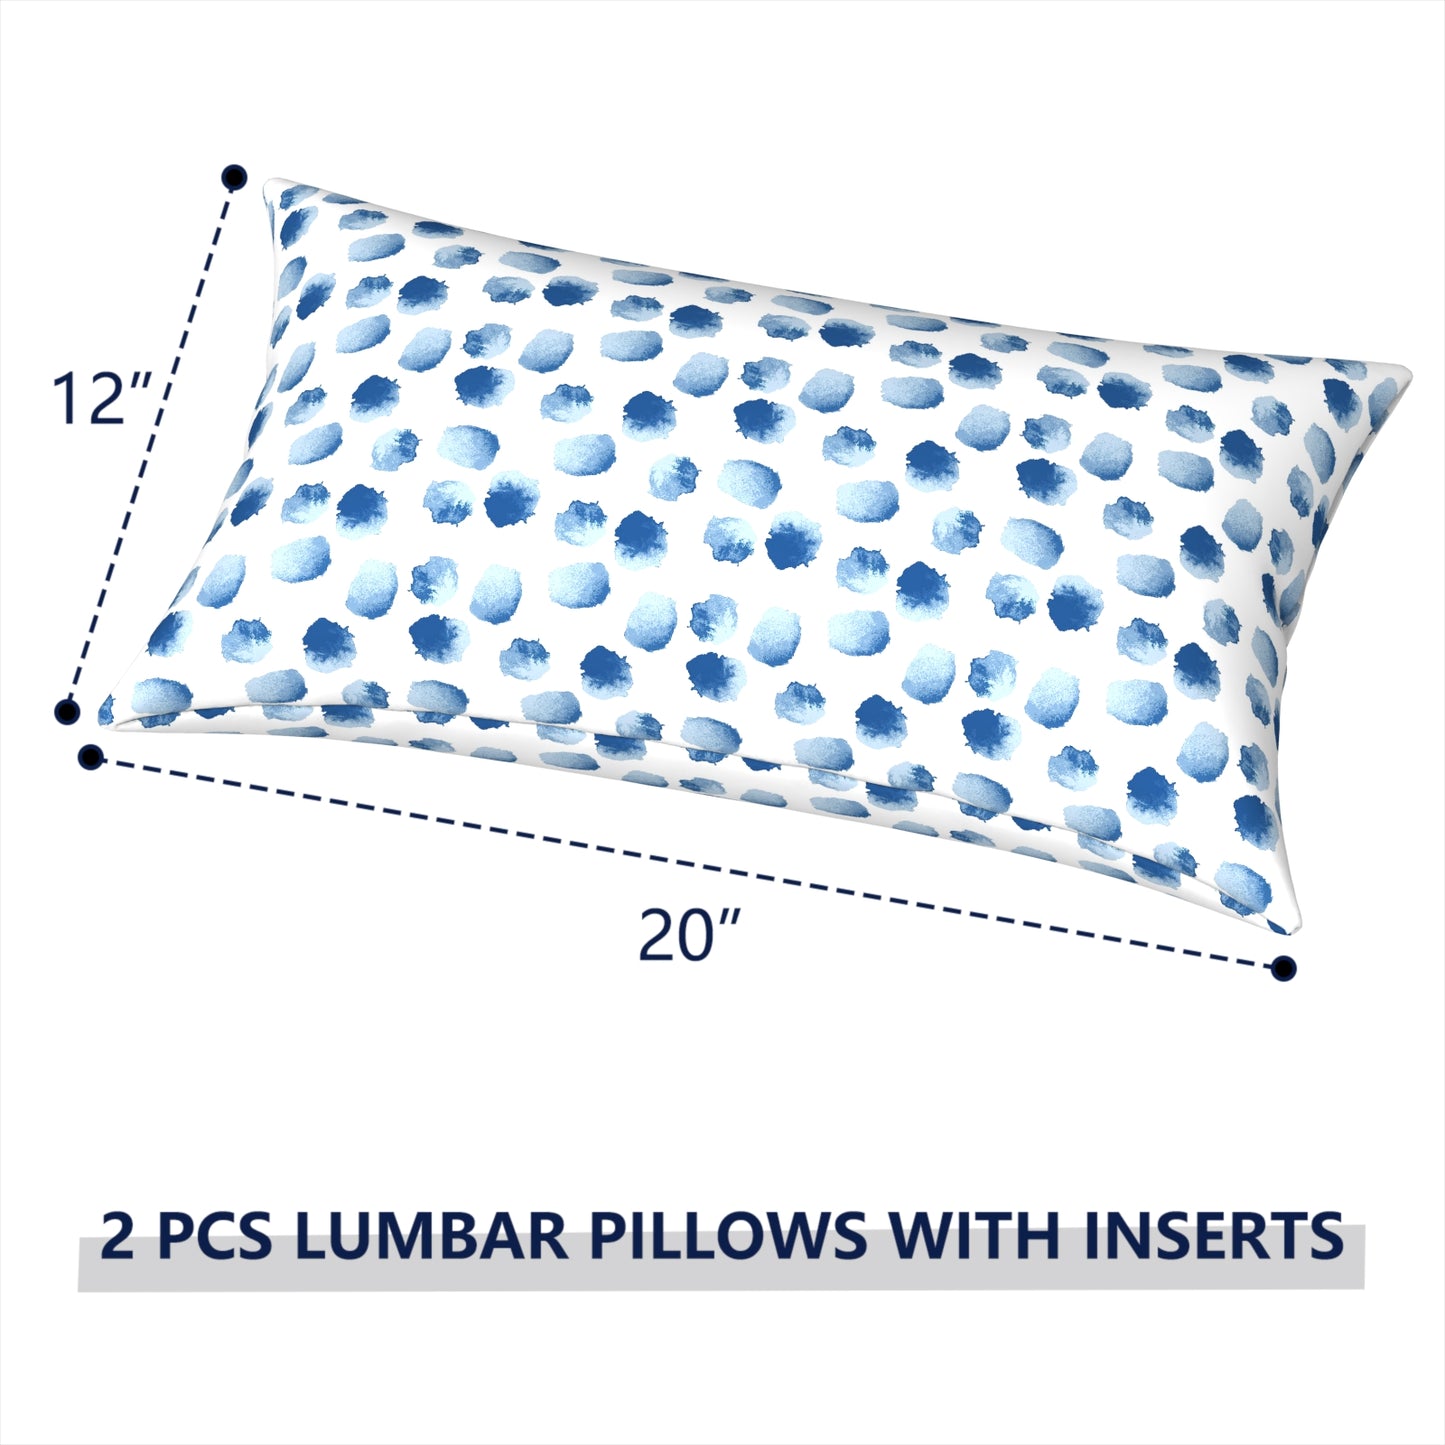 Melody Elephant Outdoor/Indoor Lumbar Pillows, Water Repellent Cushion Pillows, 12x20 Inch, Outdoor Pillows with Inserts for Home Garden, Pack of 2, Brush Blue